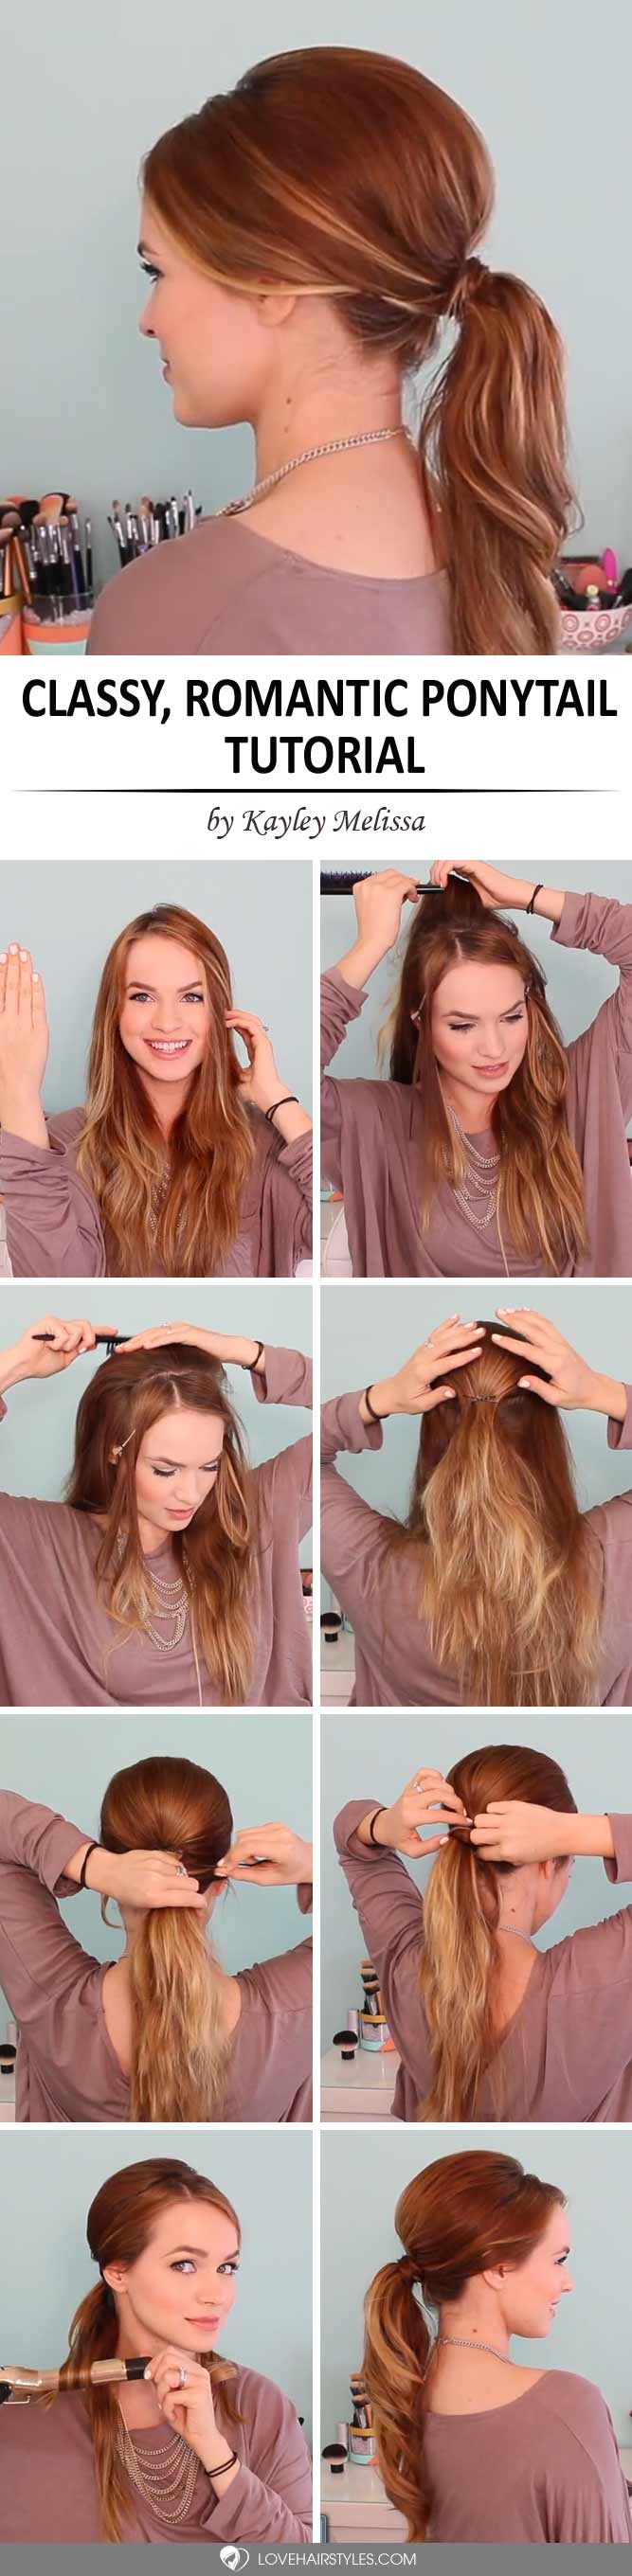 How to Do a Classy Romantic Ponytail